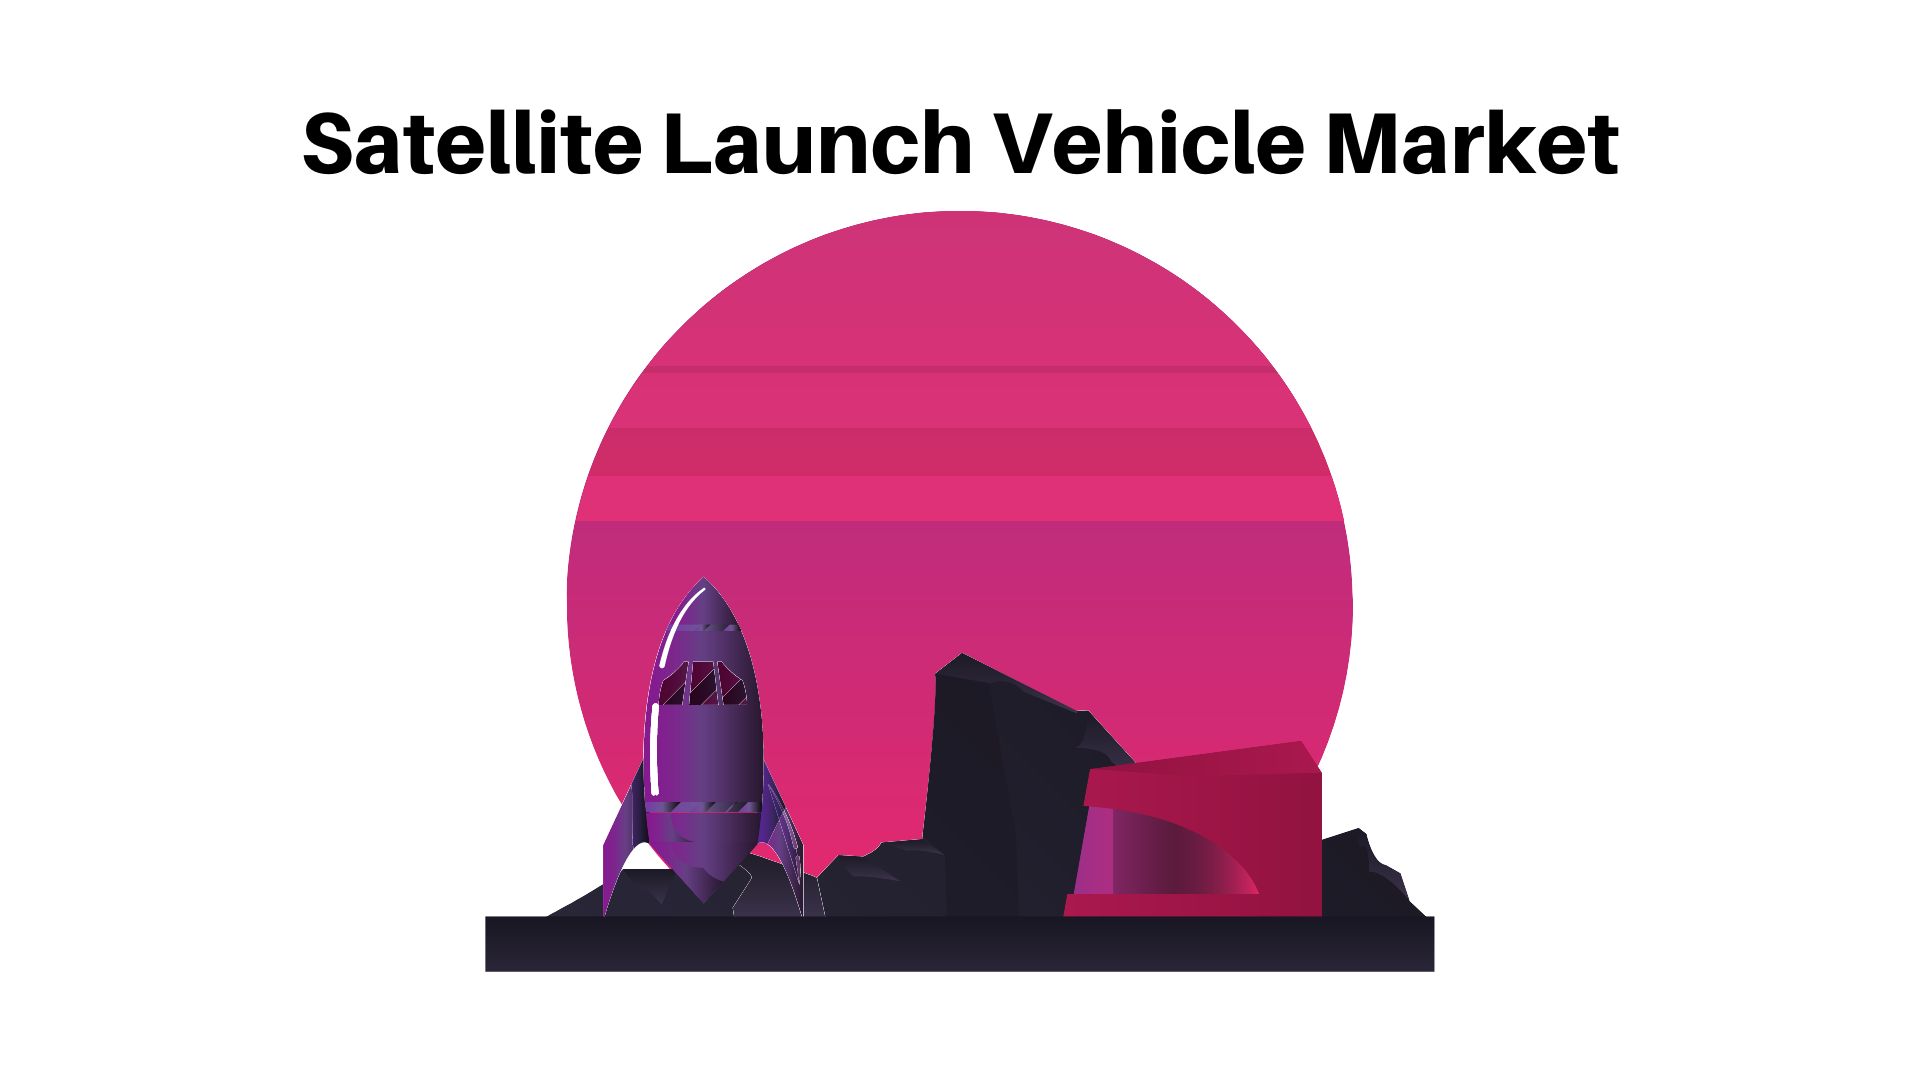 Satellite Launch Vehicle Market Expected To Reach CAGR Value Of Over 8% By 2032